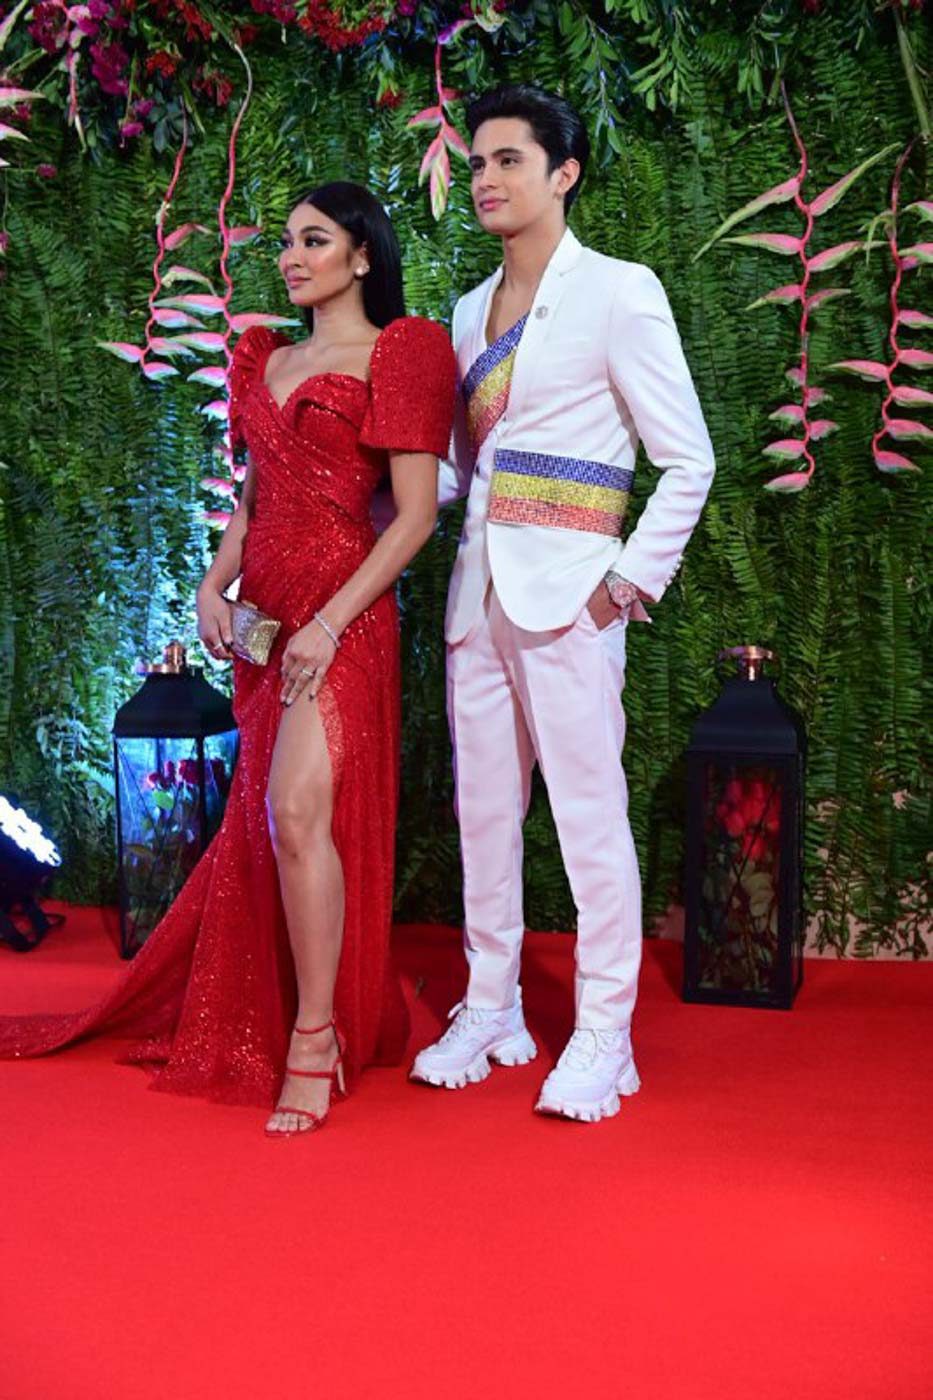 JADINE IN 2019. The love team attend the ABS-CBN Ball in 2019. File photo by Alecs Ongcal/Rappler 